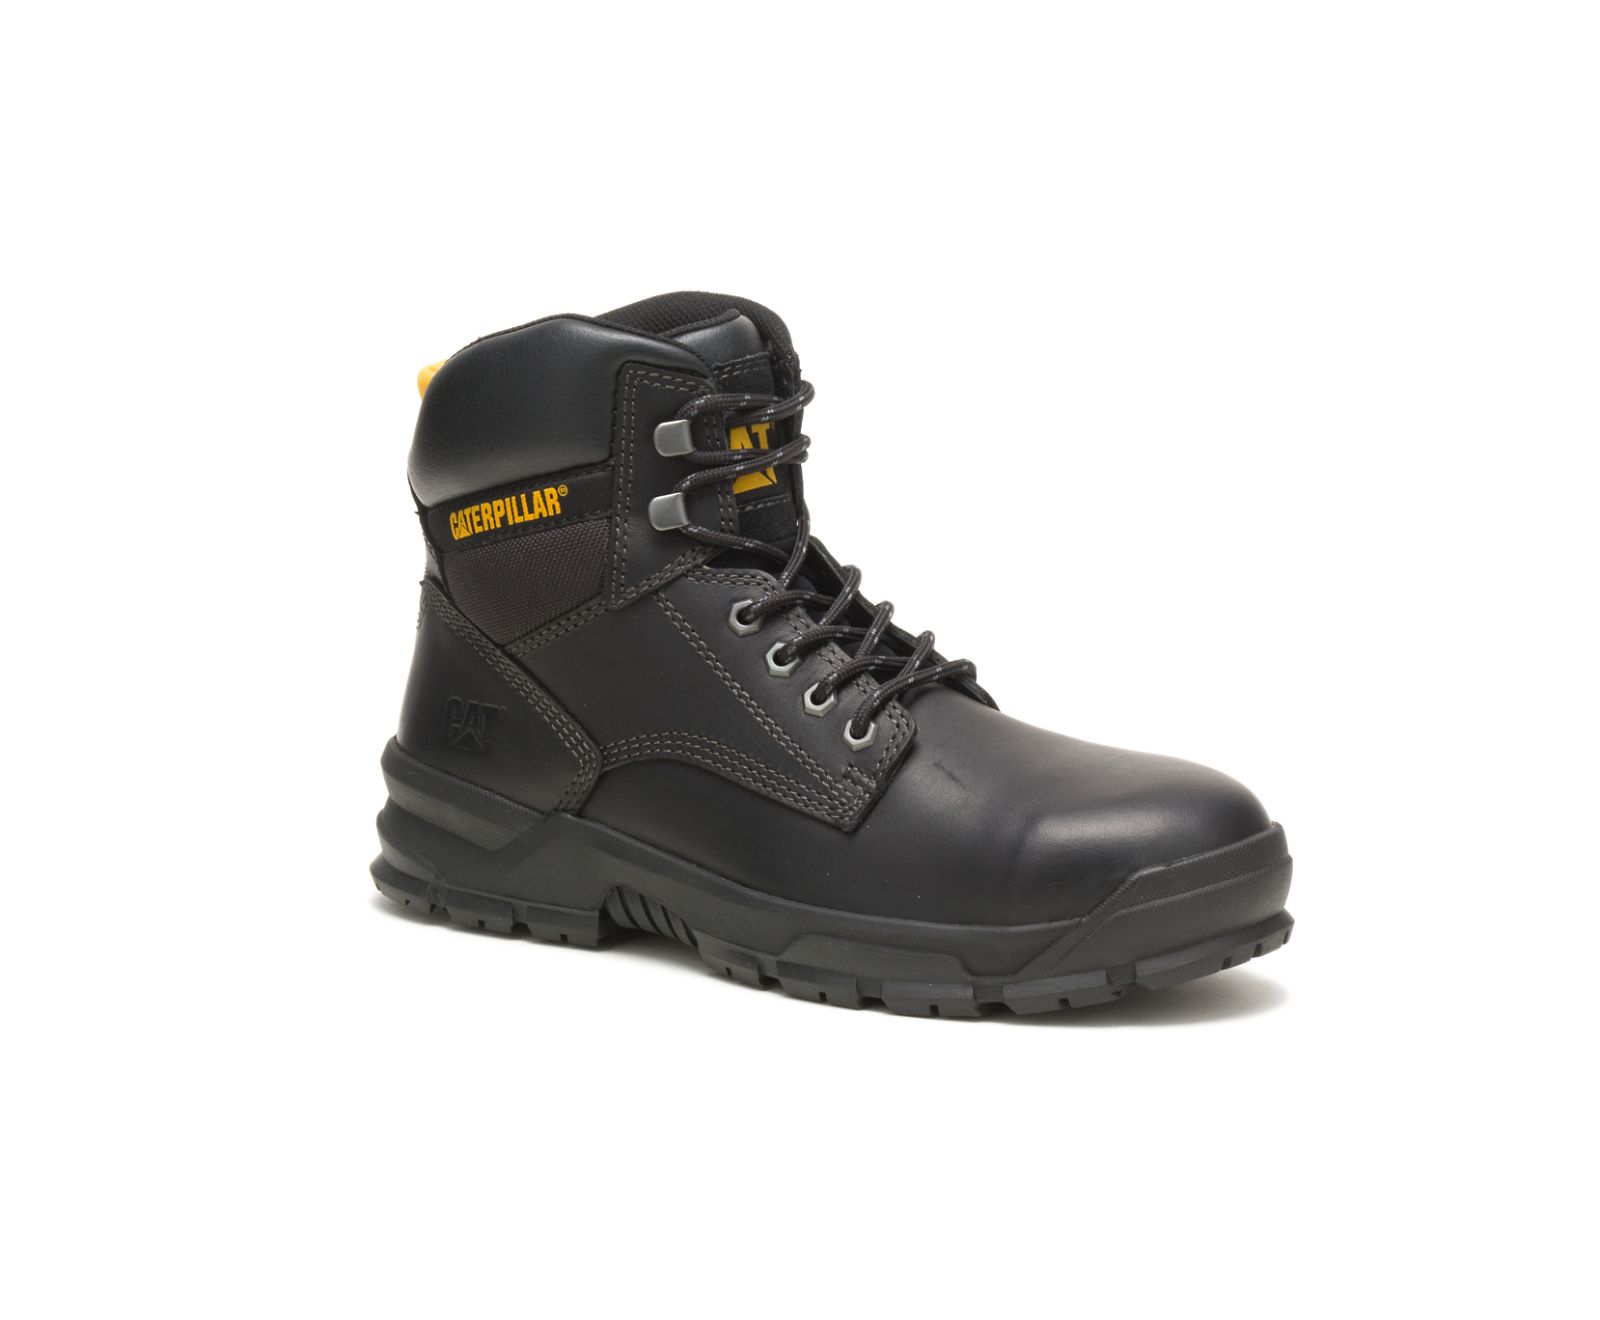 Mobilize Alloy Toe Work Boots